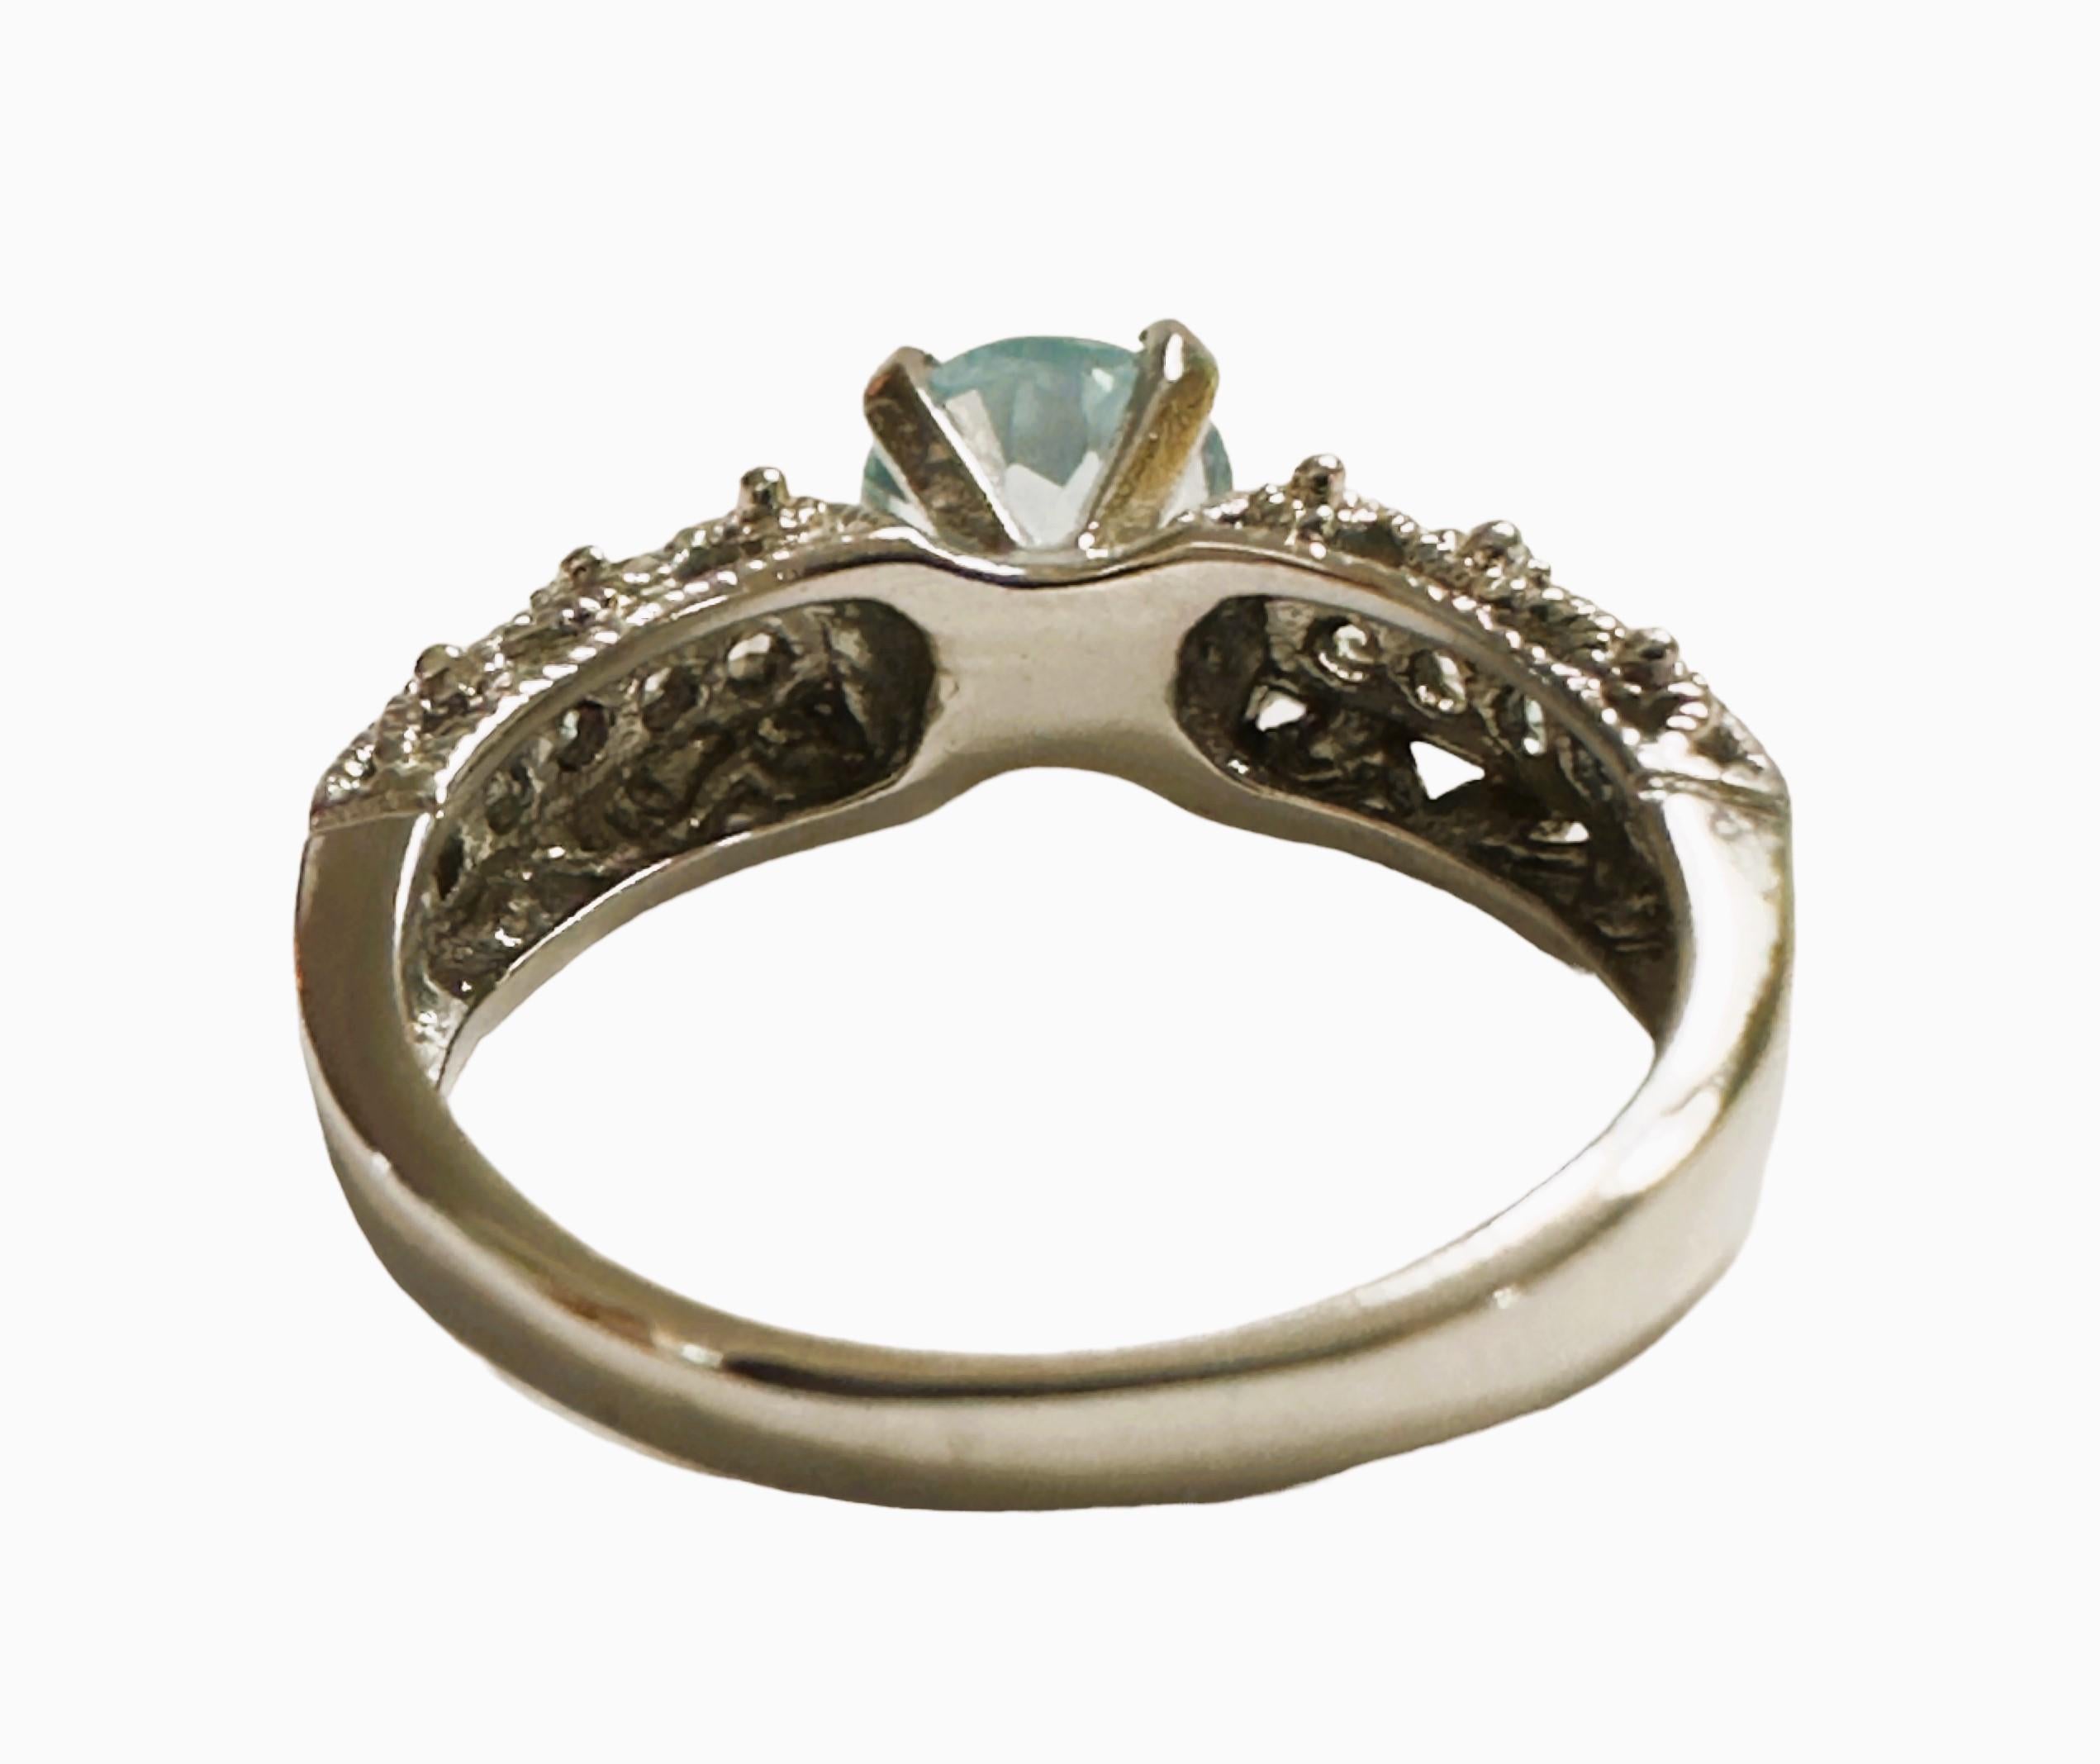 What a beautiful ring!  The ring is a size 5.5. This stone is from the Philippines. It is a beautiful round cut stone and is 1.10 cts.  It's a very high quality stone.  The 